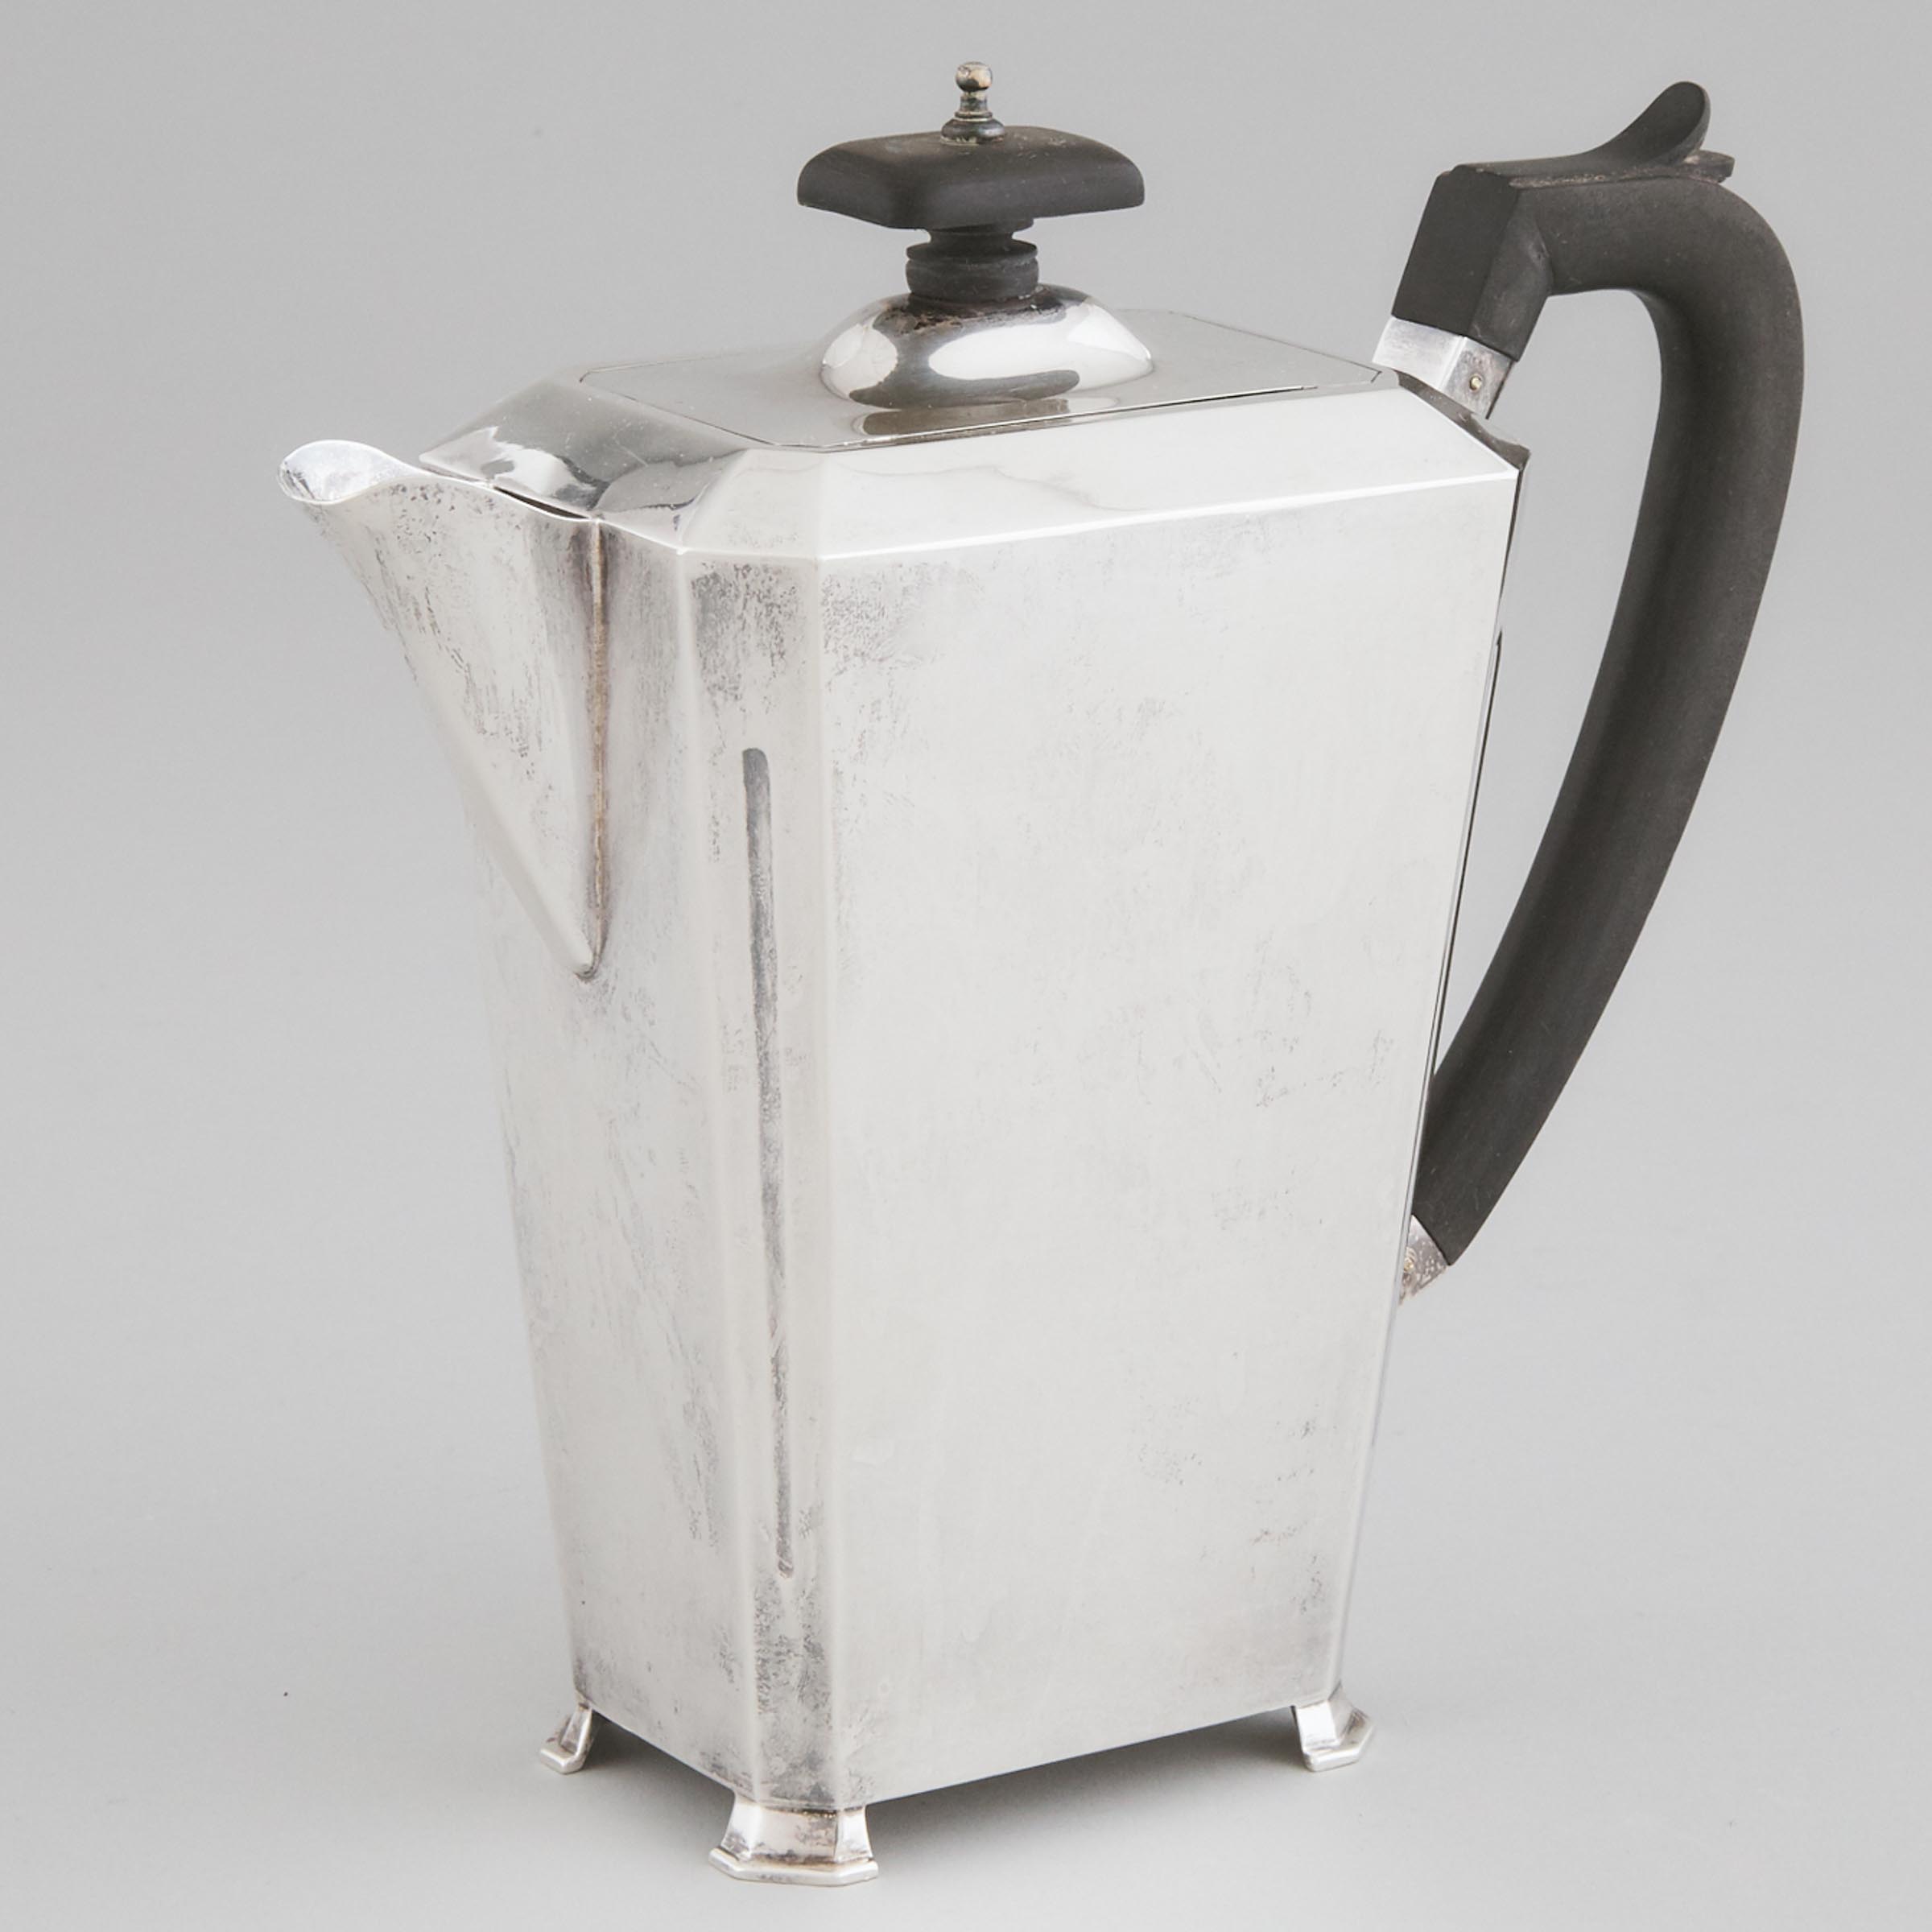 English Silver Hot Water Pot, S. Blanckensee & Son, Chester, 1938